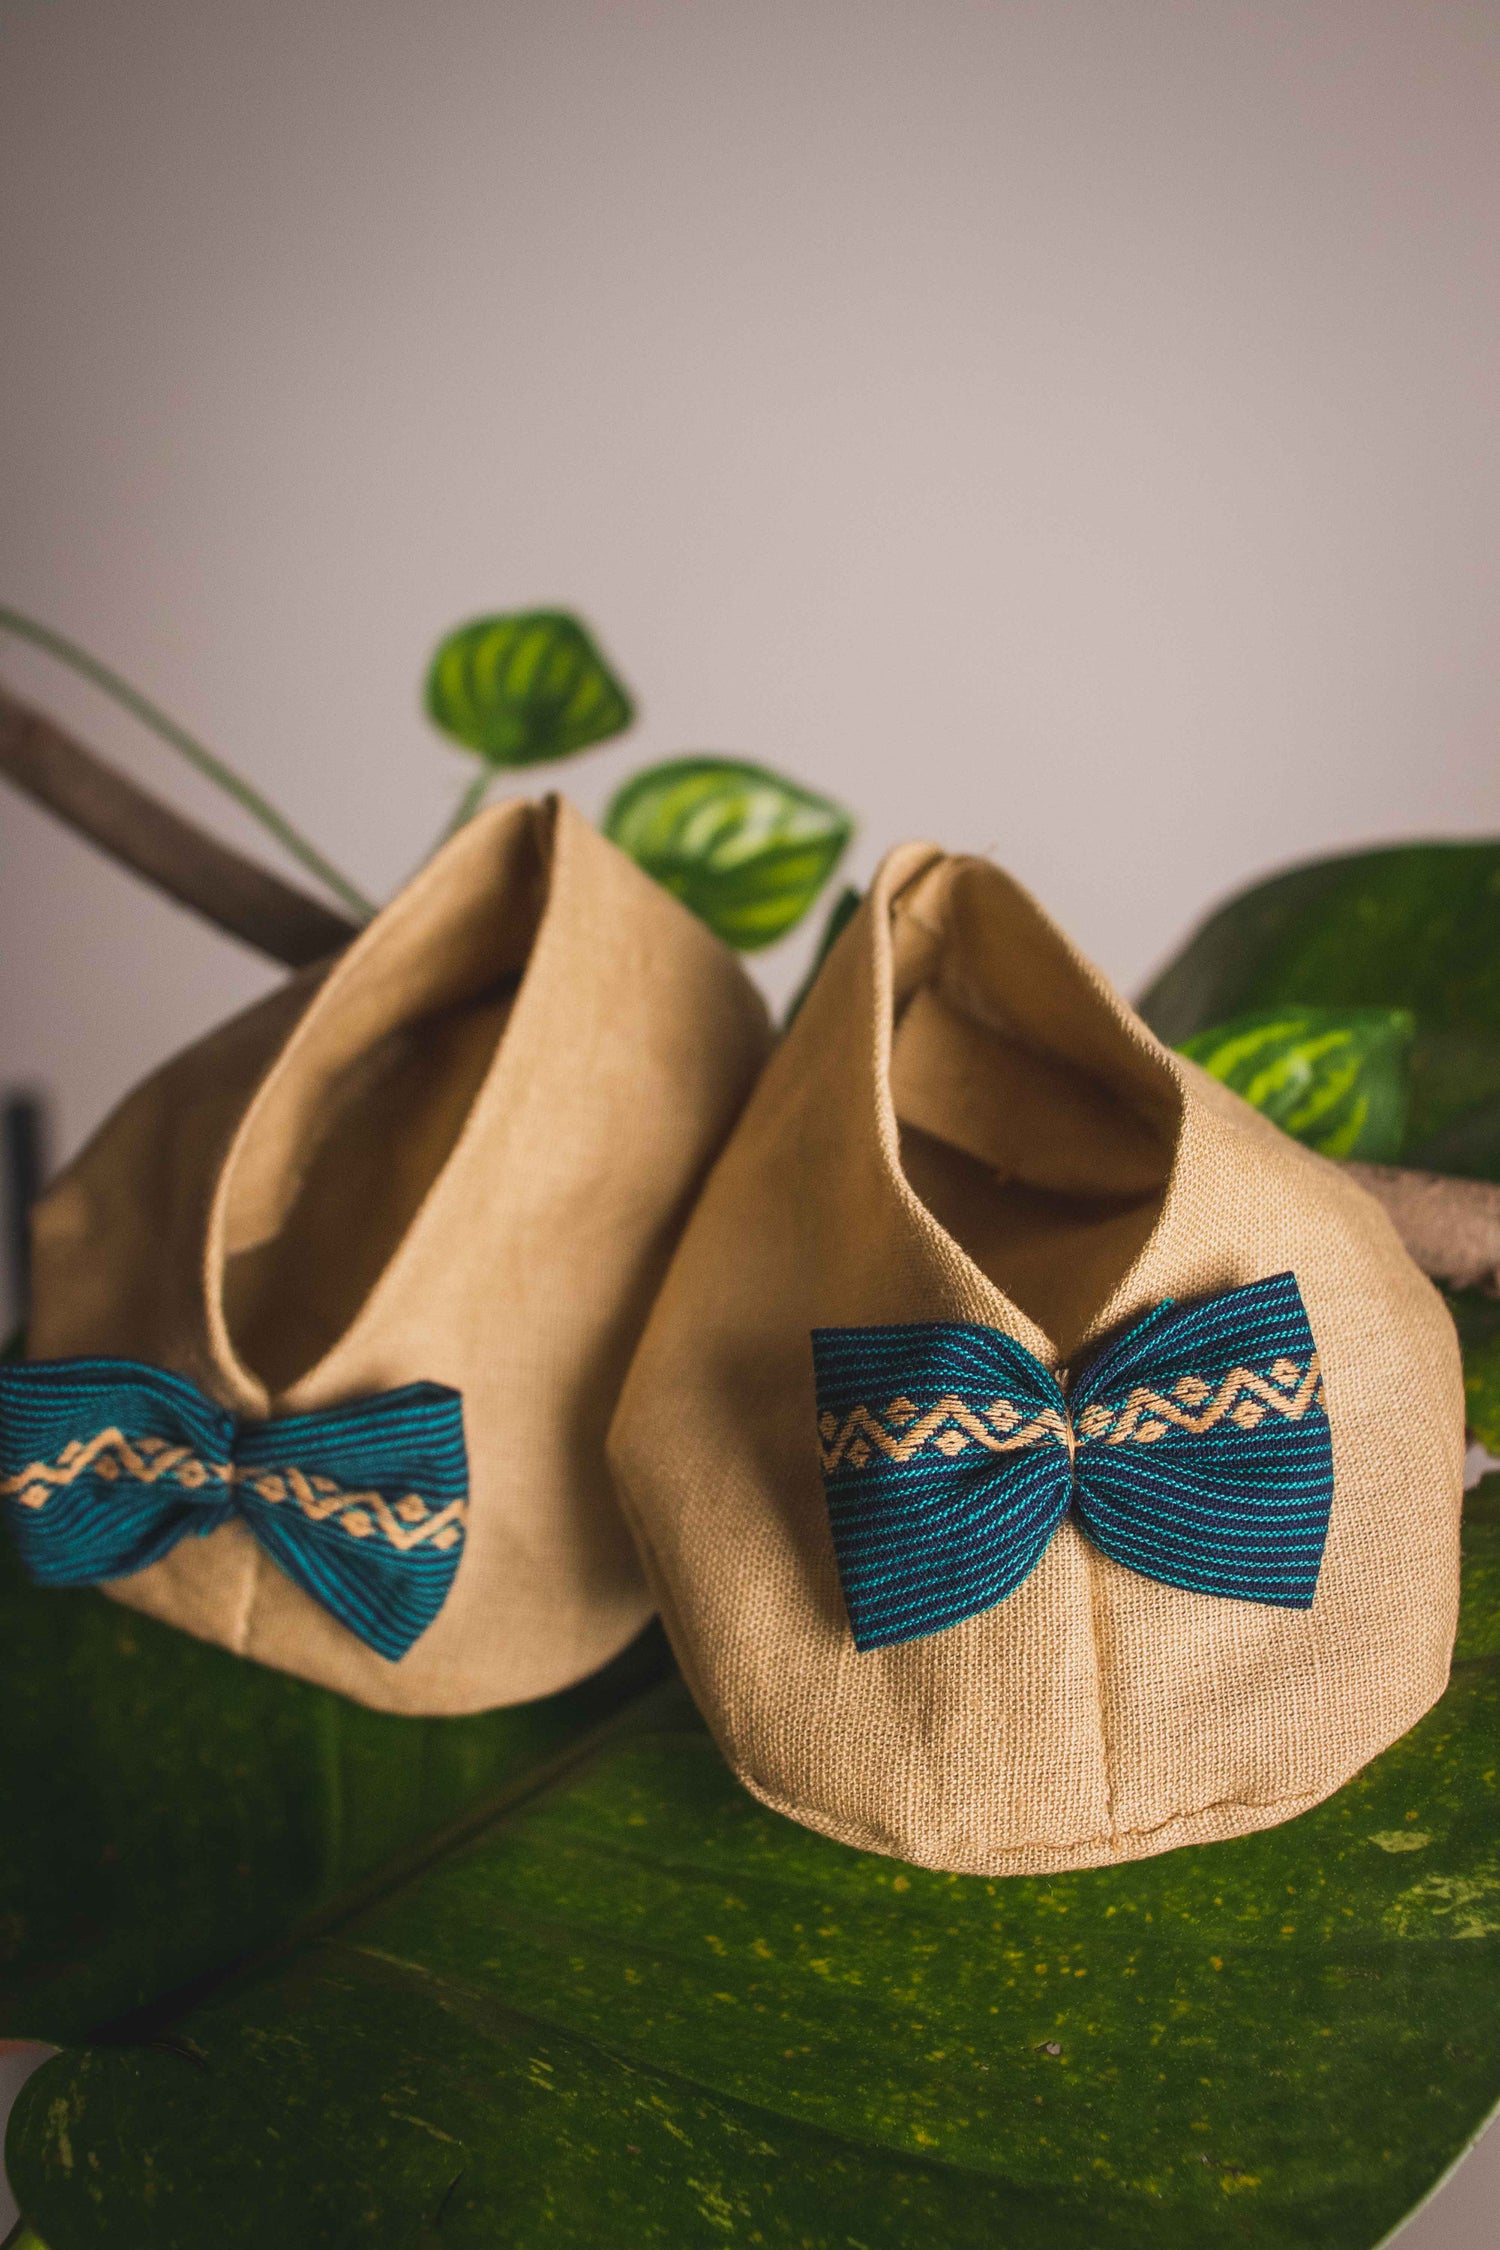 Bow-Tie Styled Handmade Shoes